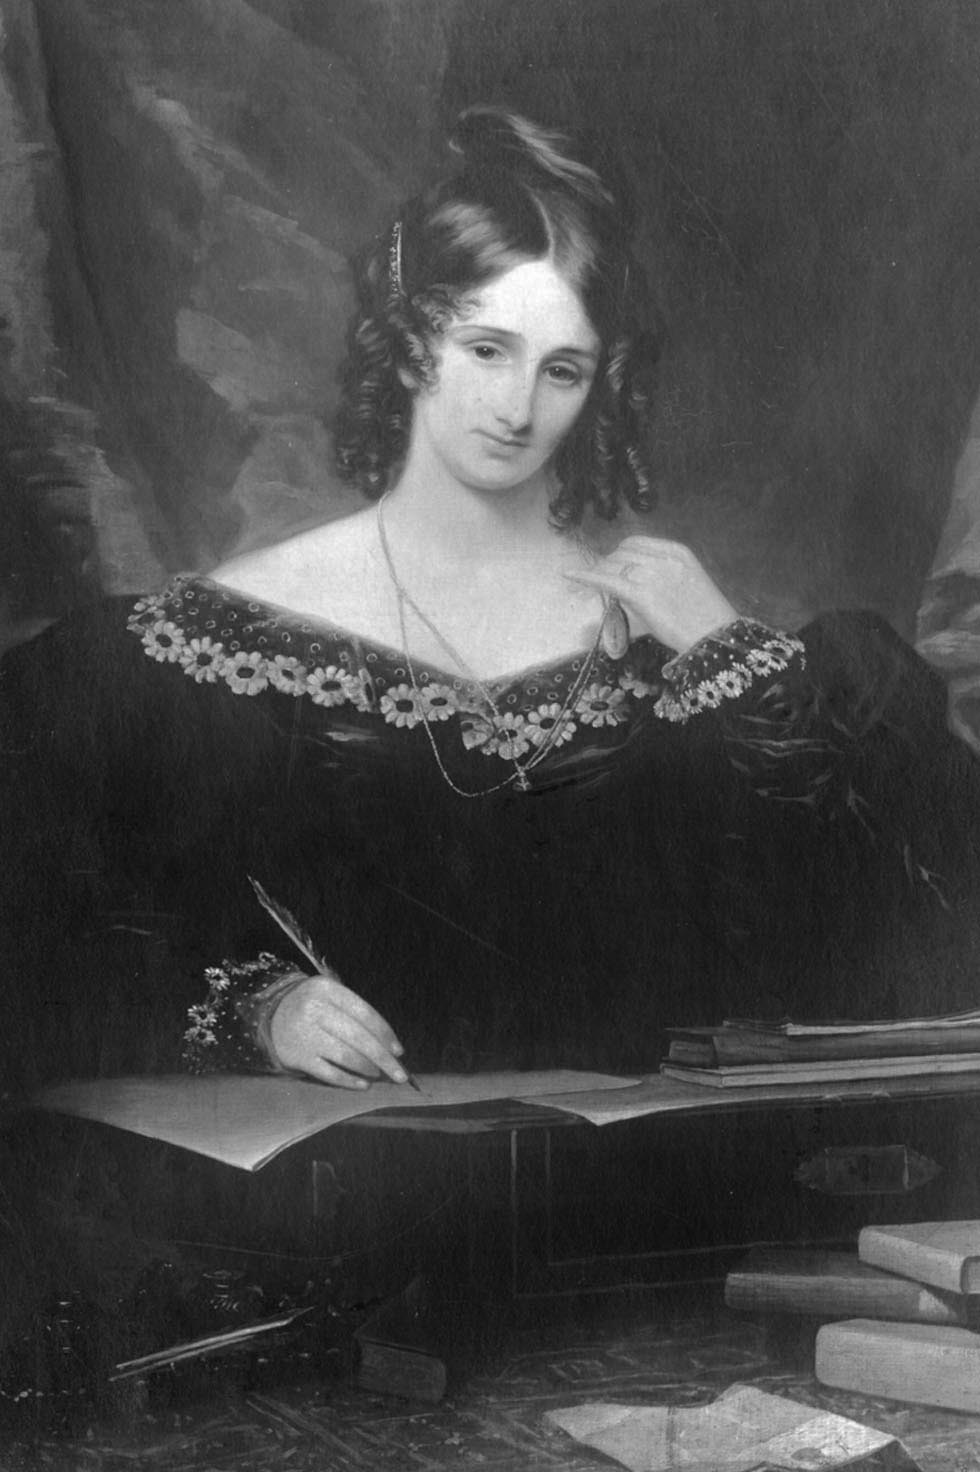 Mary Shelley August 30, 1797 – February 1, 1851